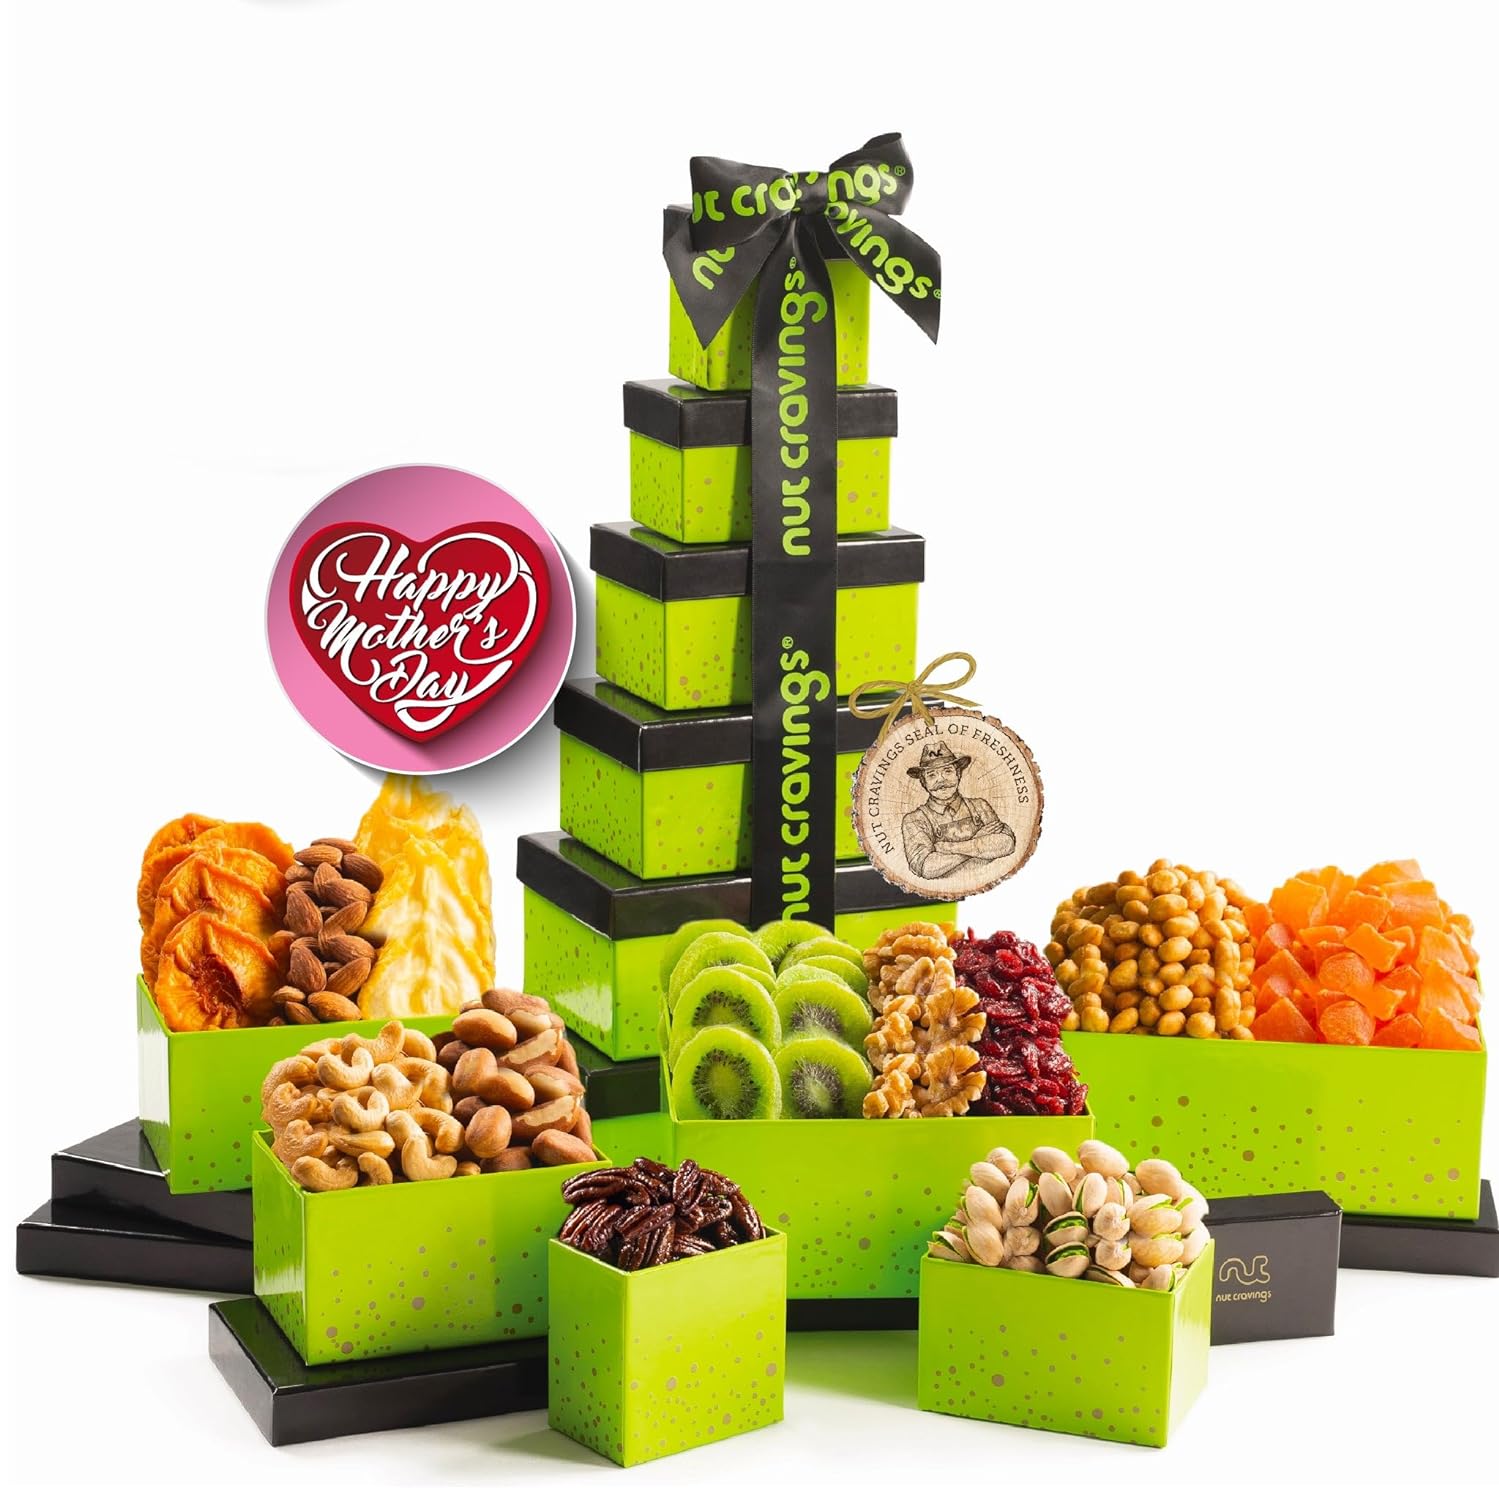 Nut Cravings Gourmet Collection - Mothers Day Dried Fruit & Mixed Nuts Gift Basket Green Tower + Ribbon (12 Assortments) Arrangement Platter, Birthday Care Package - Healthy Kosher